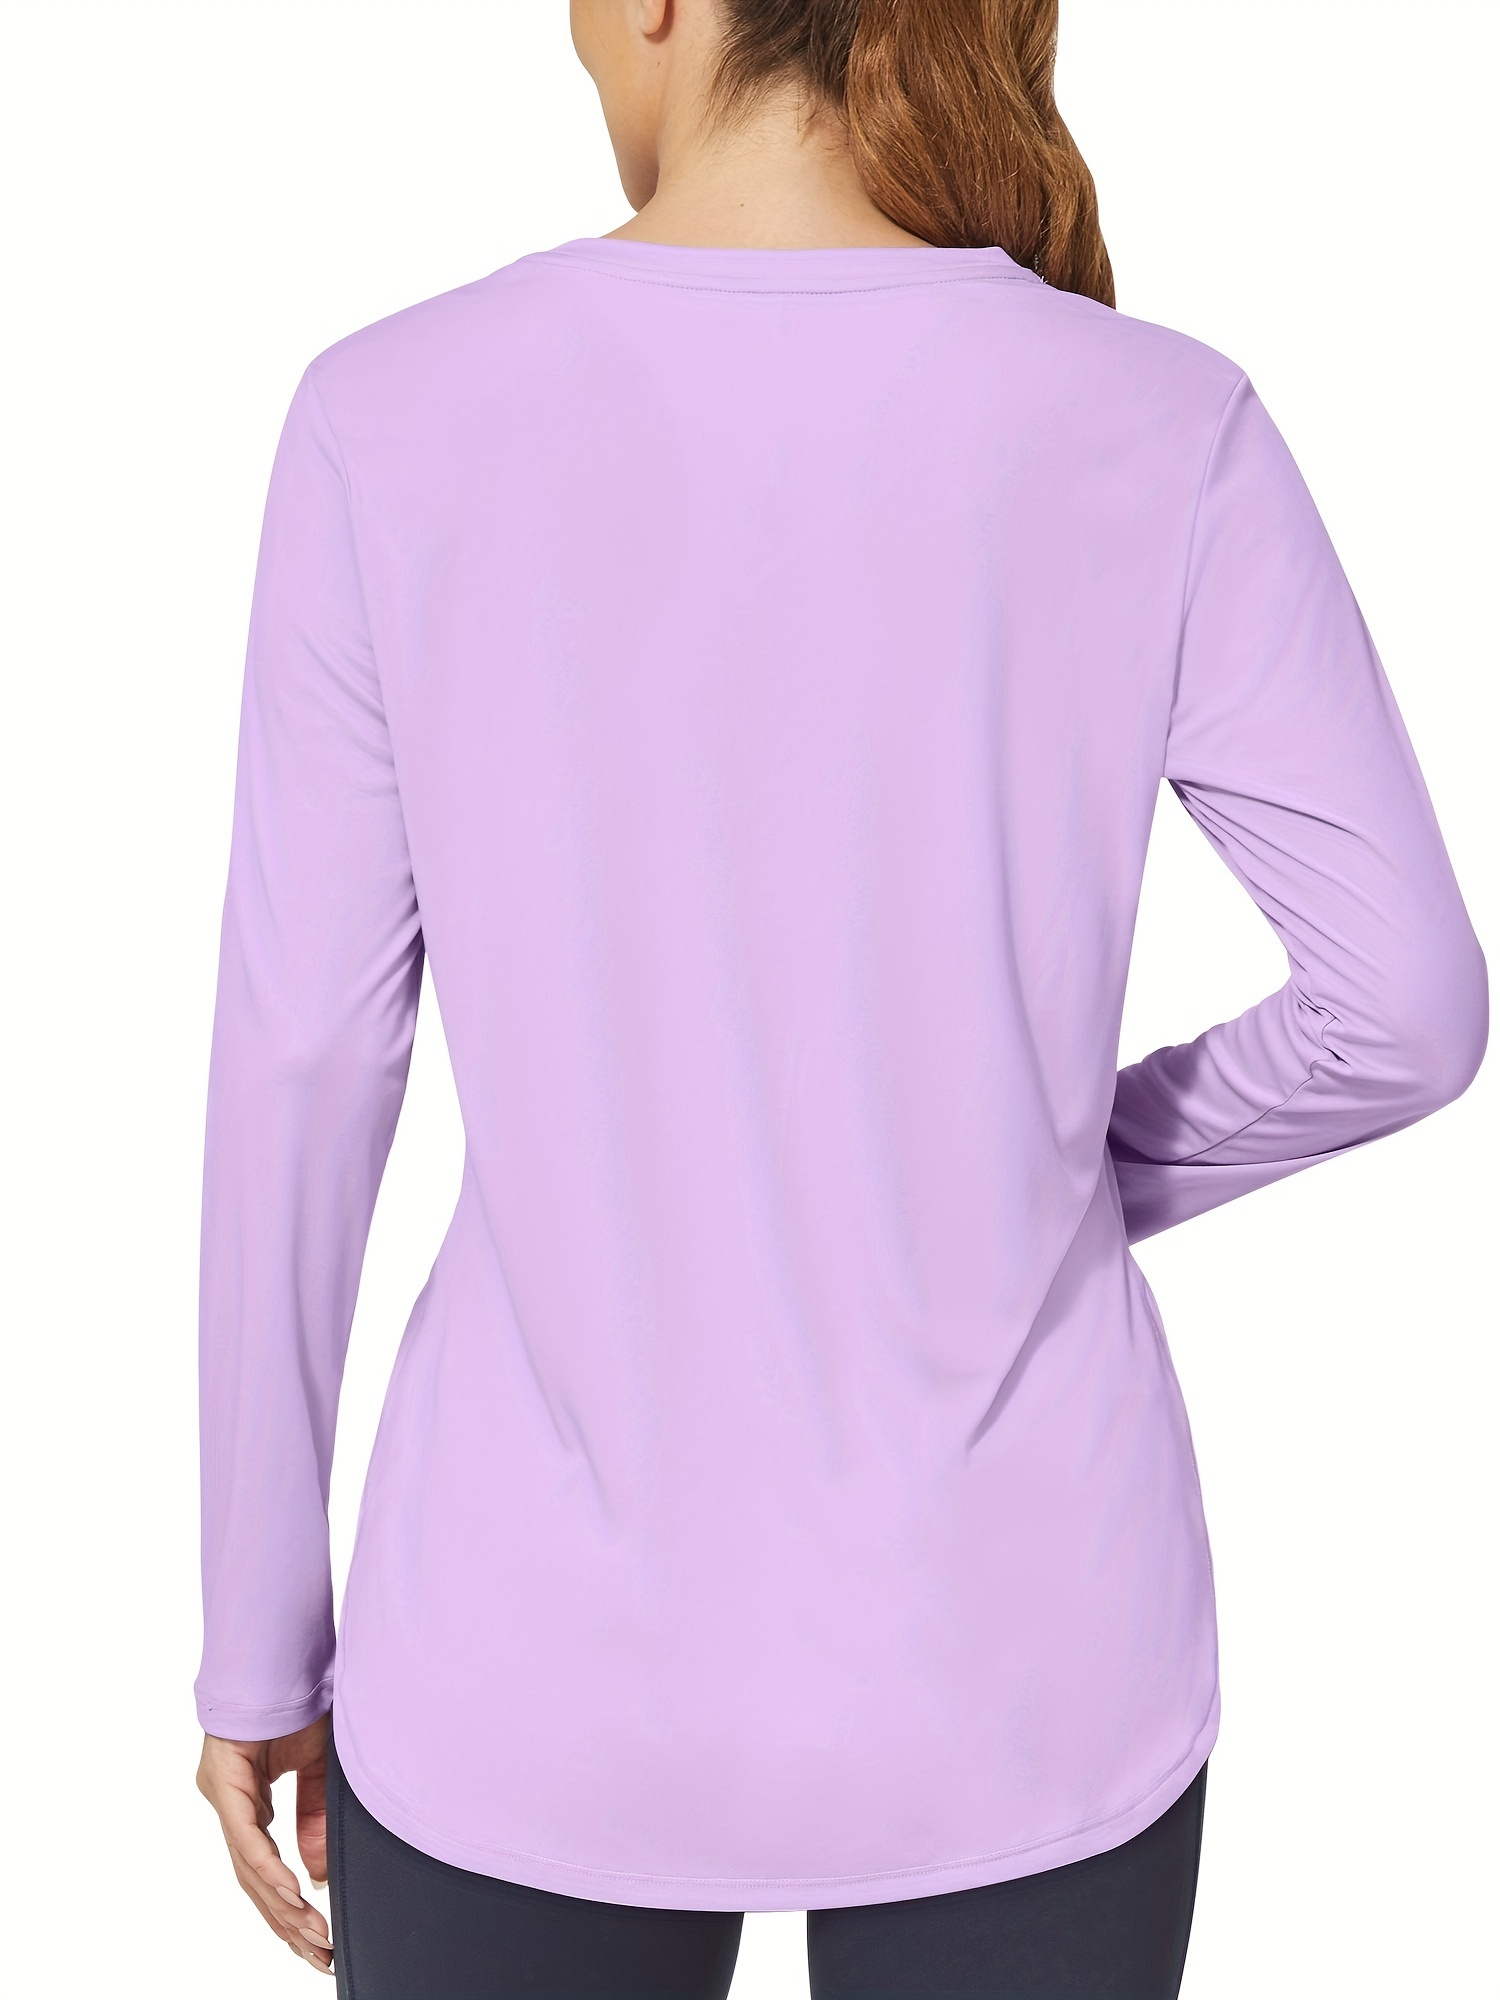 Women Long Sleeve Shirt Large Size Fit Lady Casual Purple Shirts Fashion  Summer Arrivals 2H080 210513 From 50,28 €